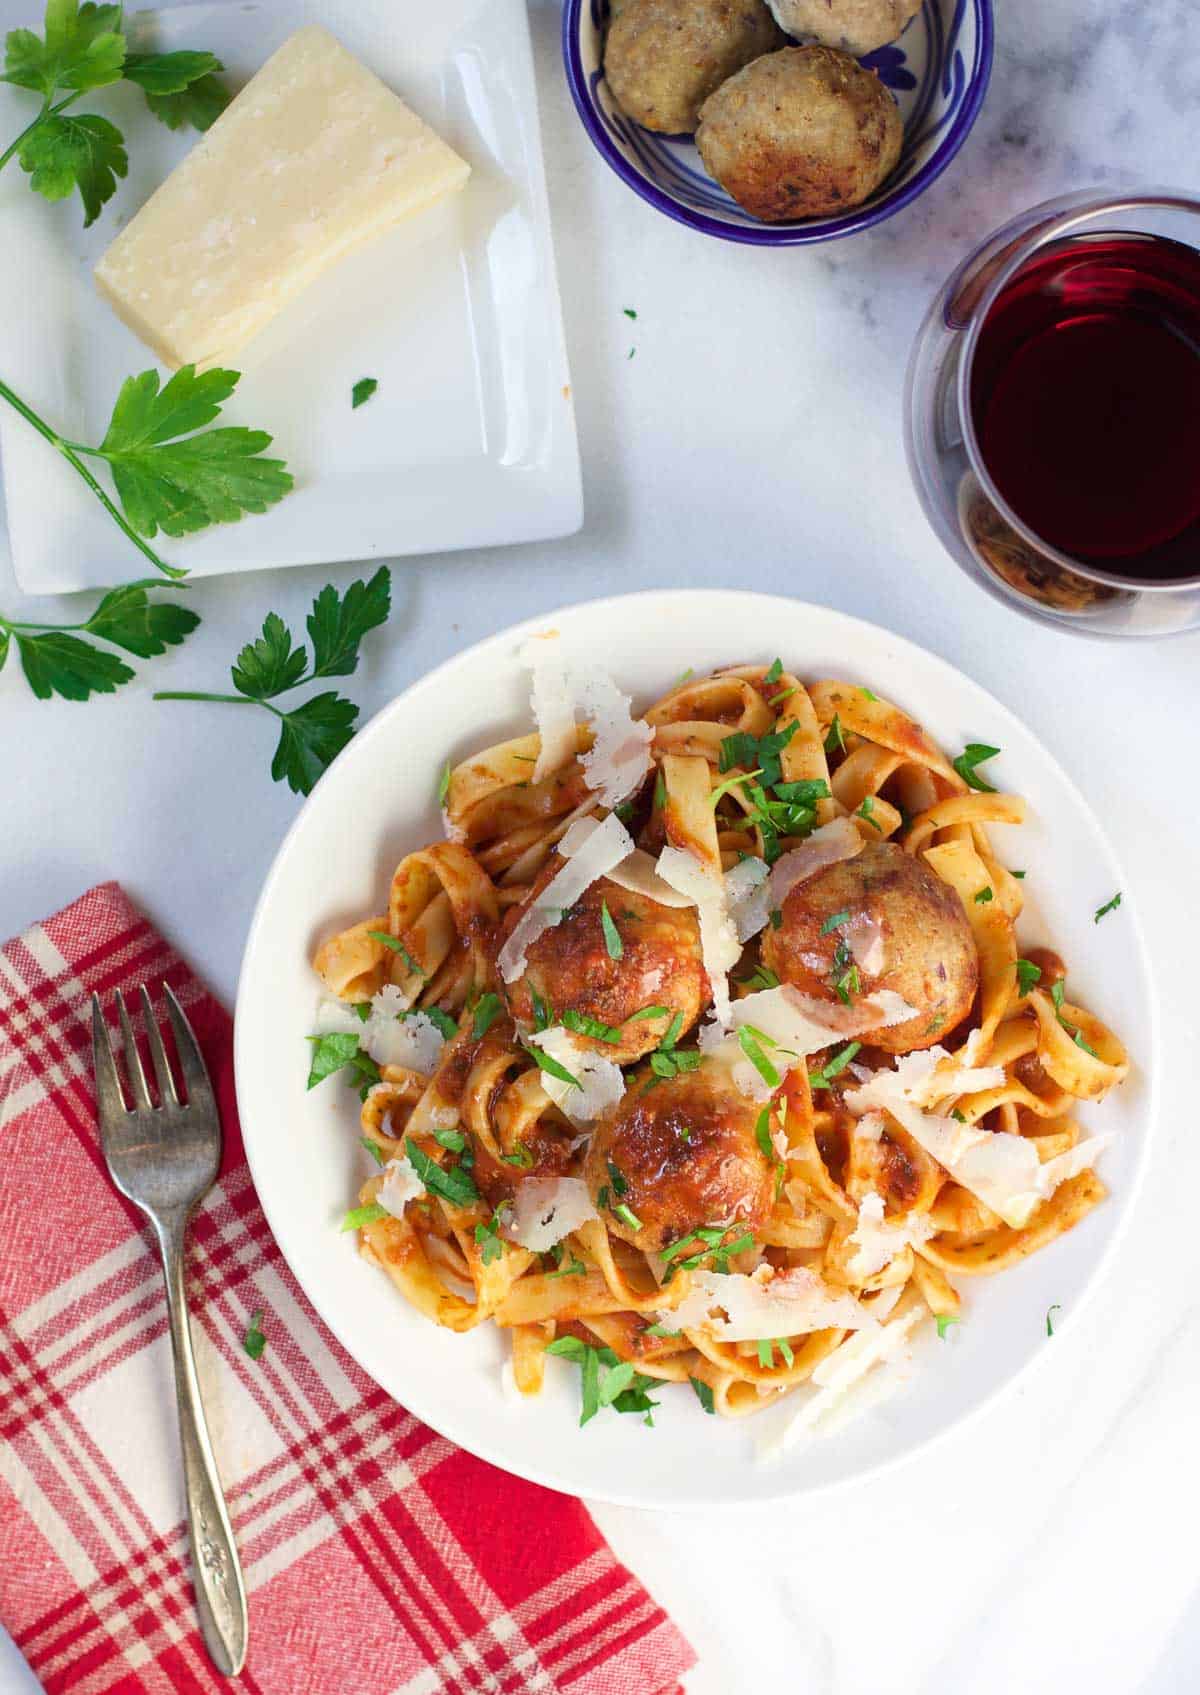 A trencher of pasta with smoked turkey meatballs and a glass of wine